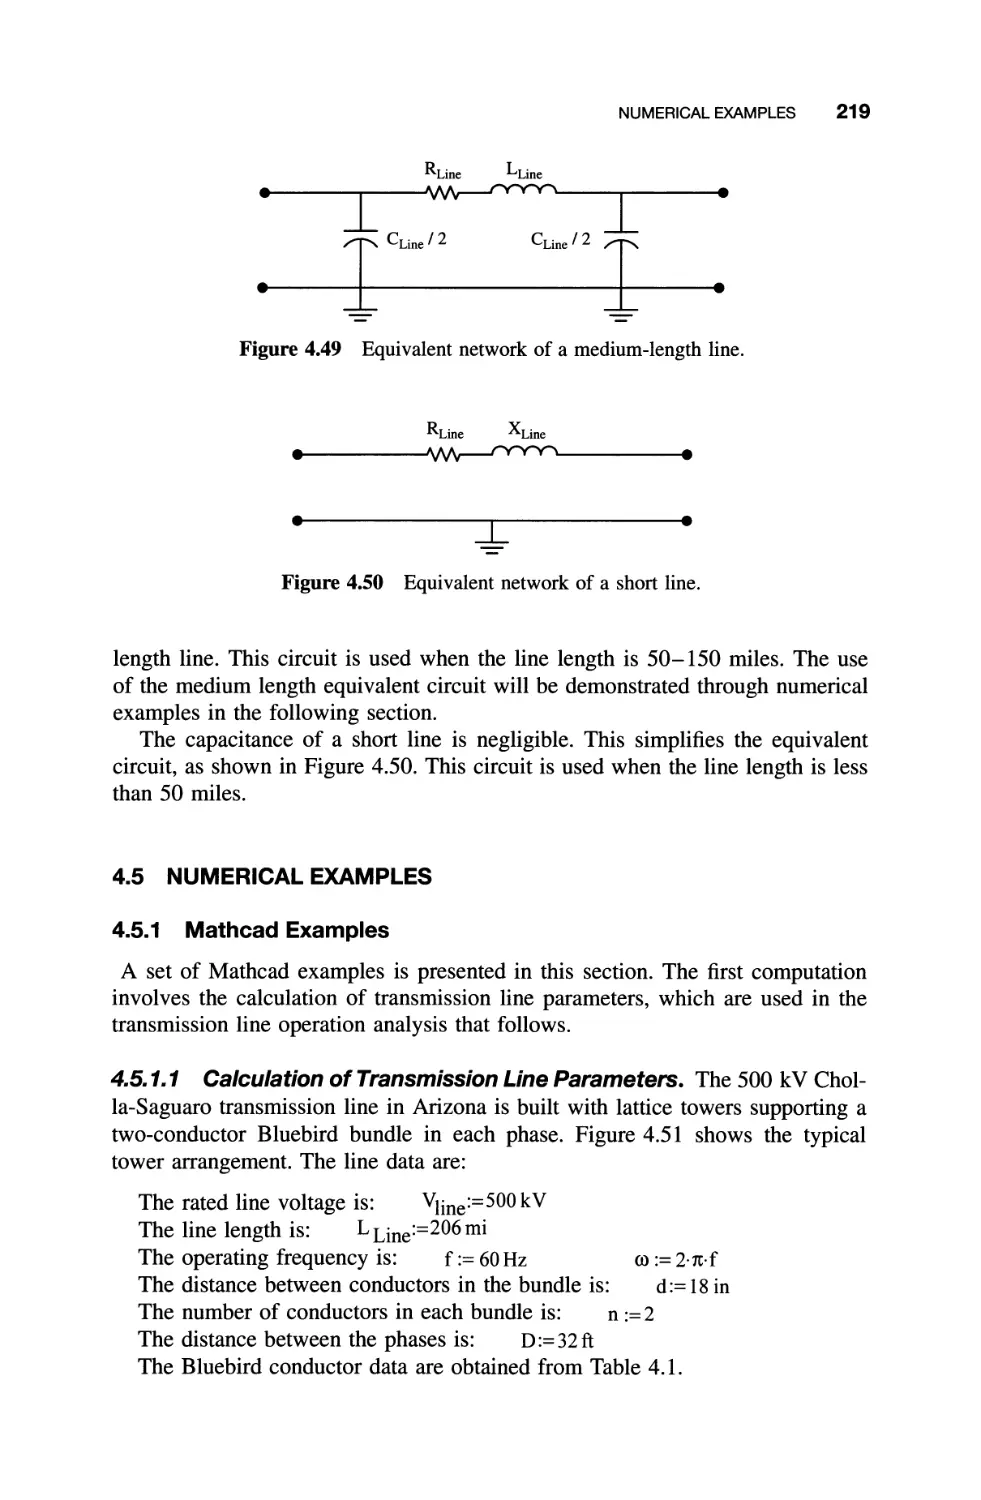 4.5 Numerical Examples